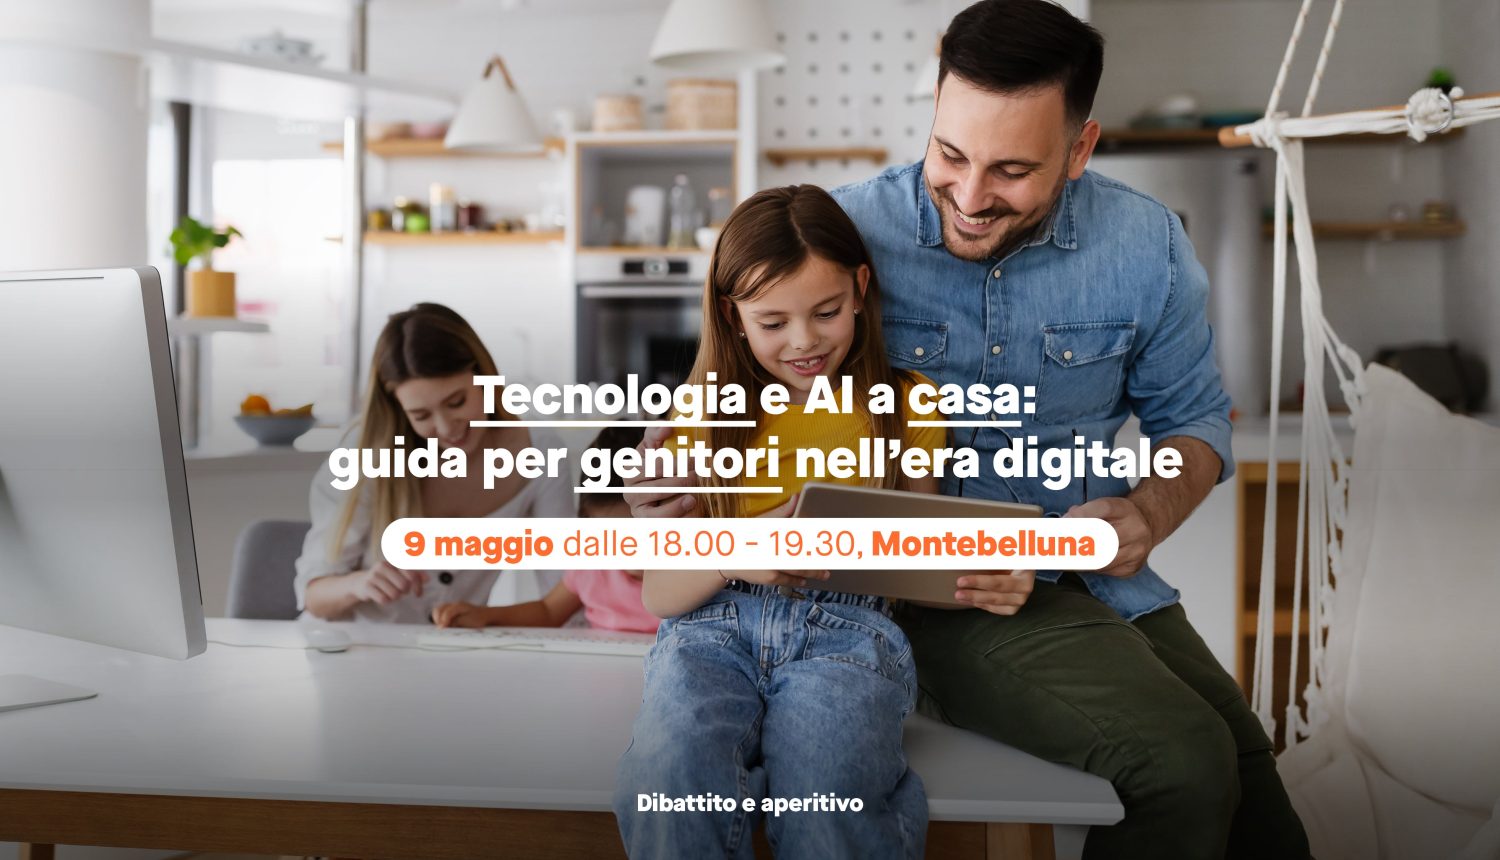 Technology and AI at home: a Guide for Parents in the Digital Age